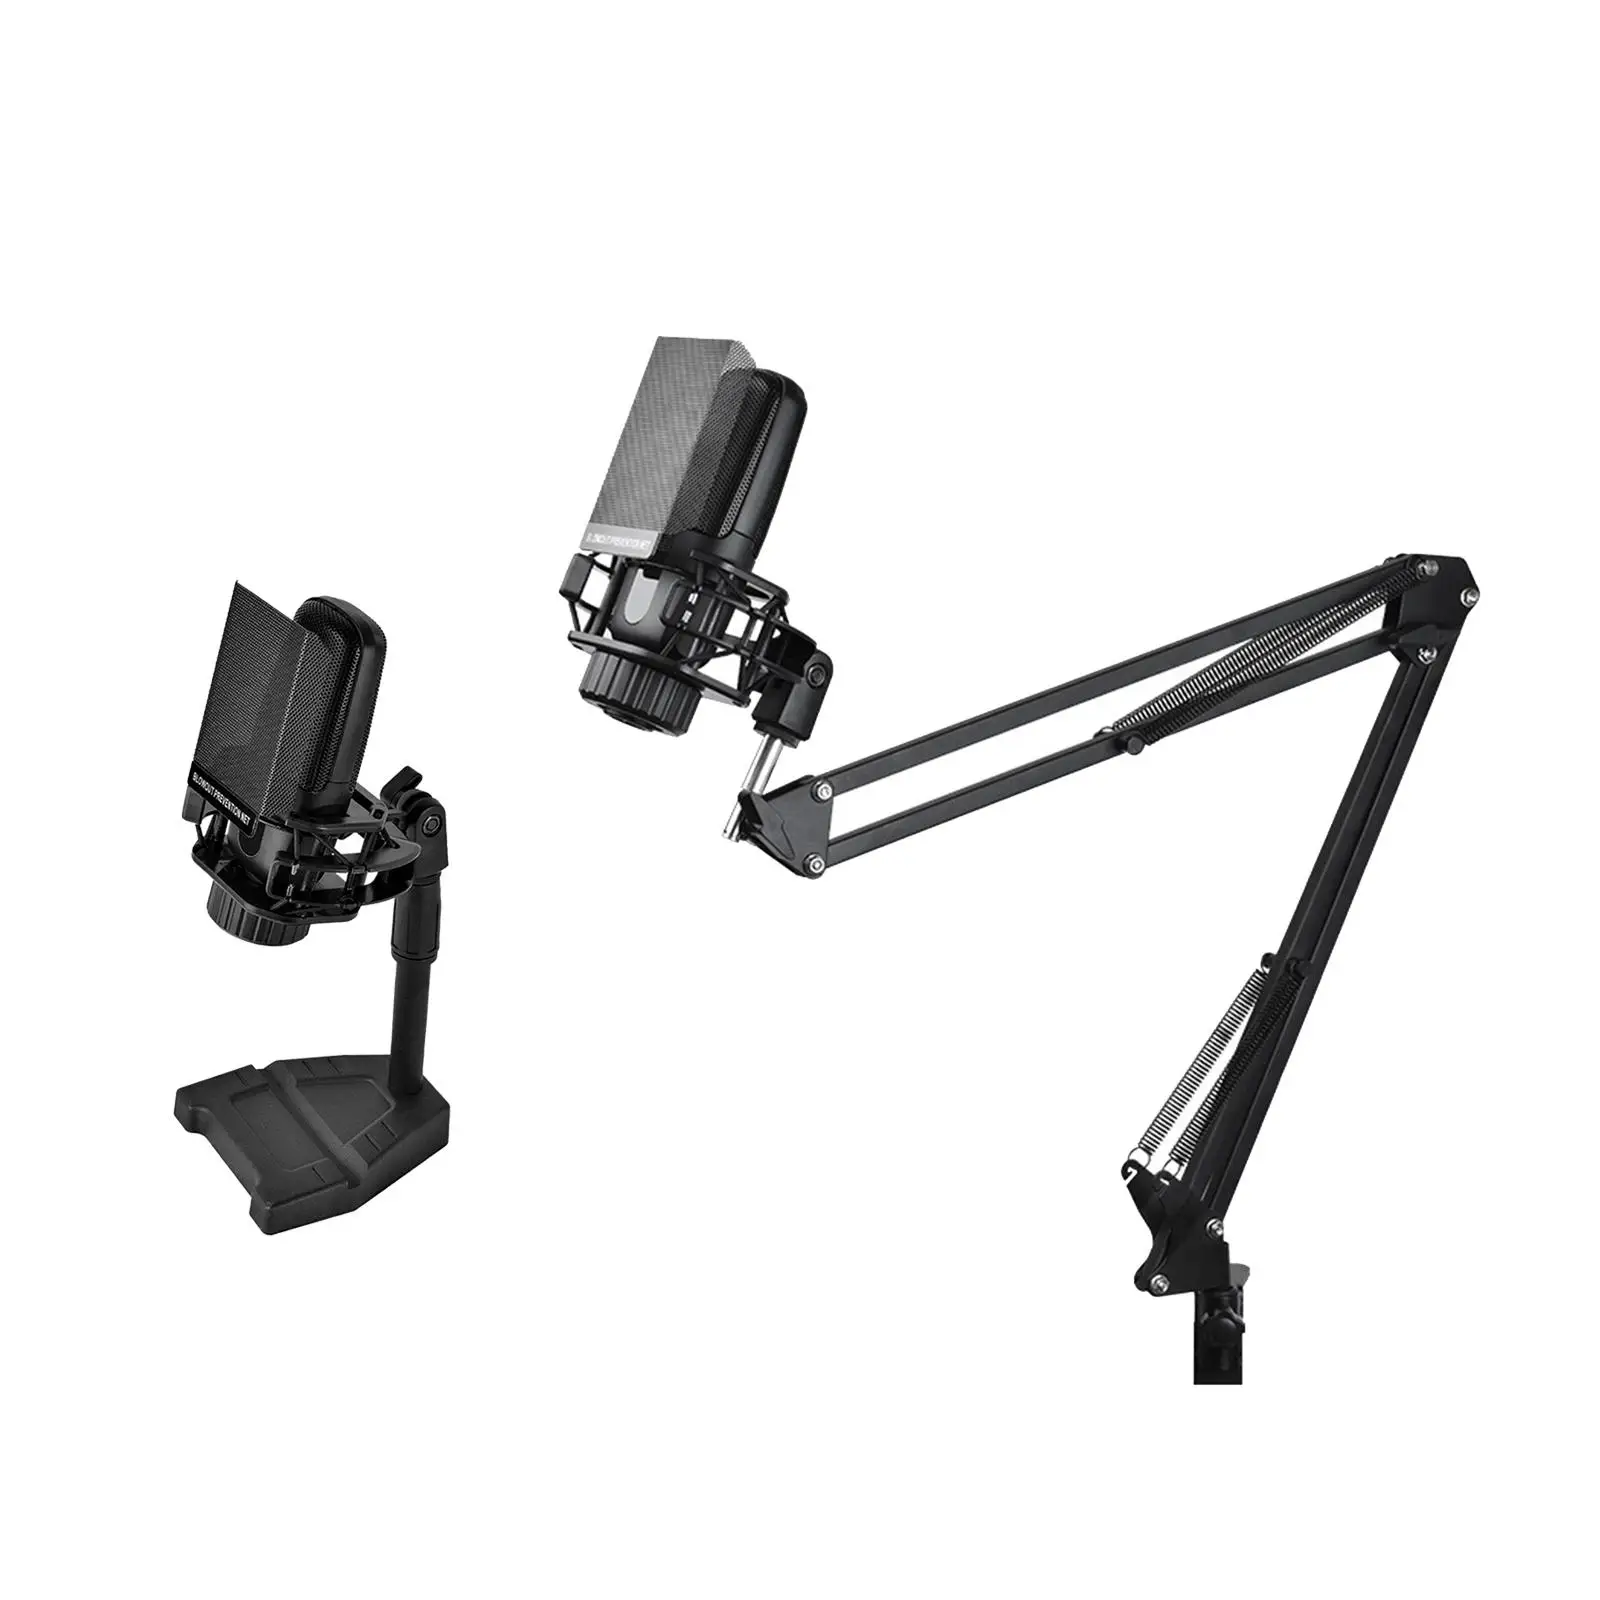 Microphone Arm Stand with Microphone Foldable Universal Desktop Holder Heavy Duty Mic Suspension Mount for Gaming Live Streaming